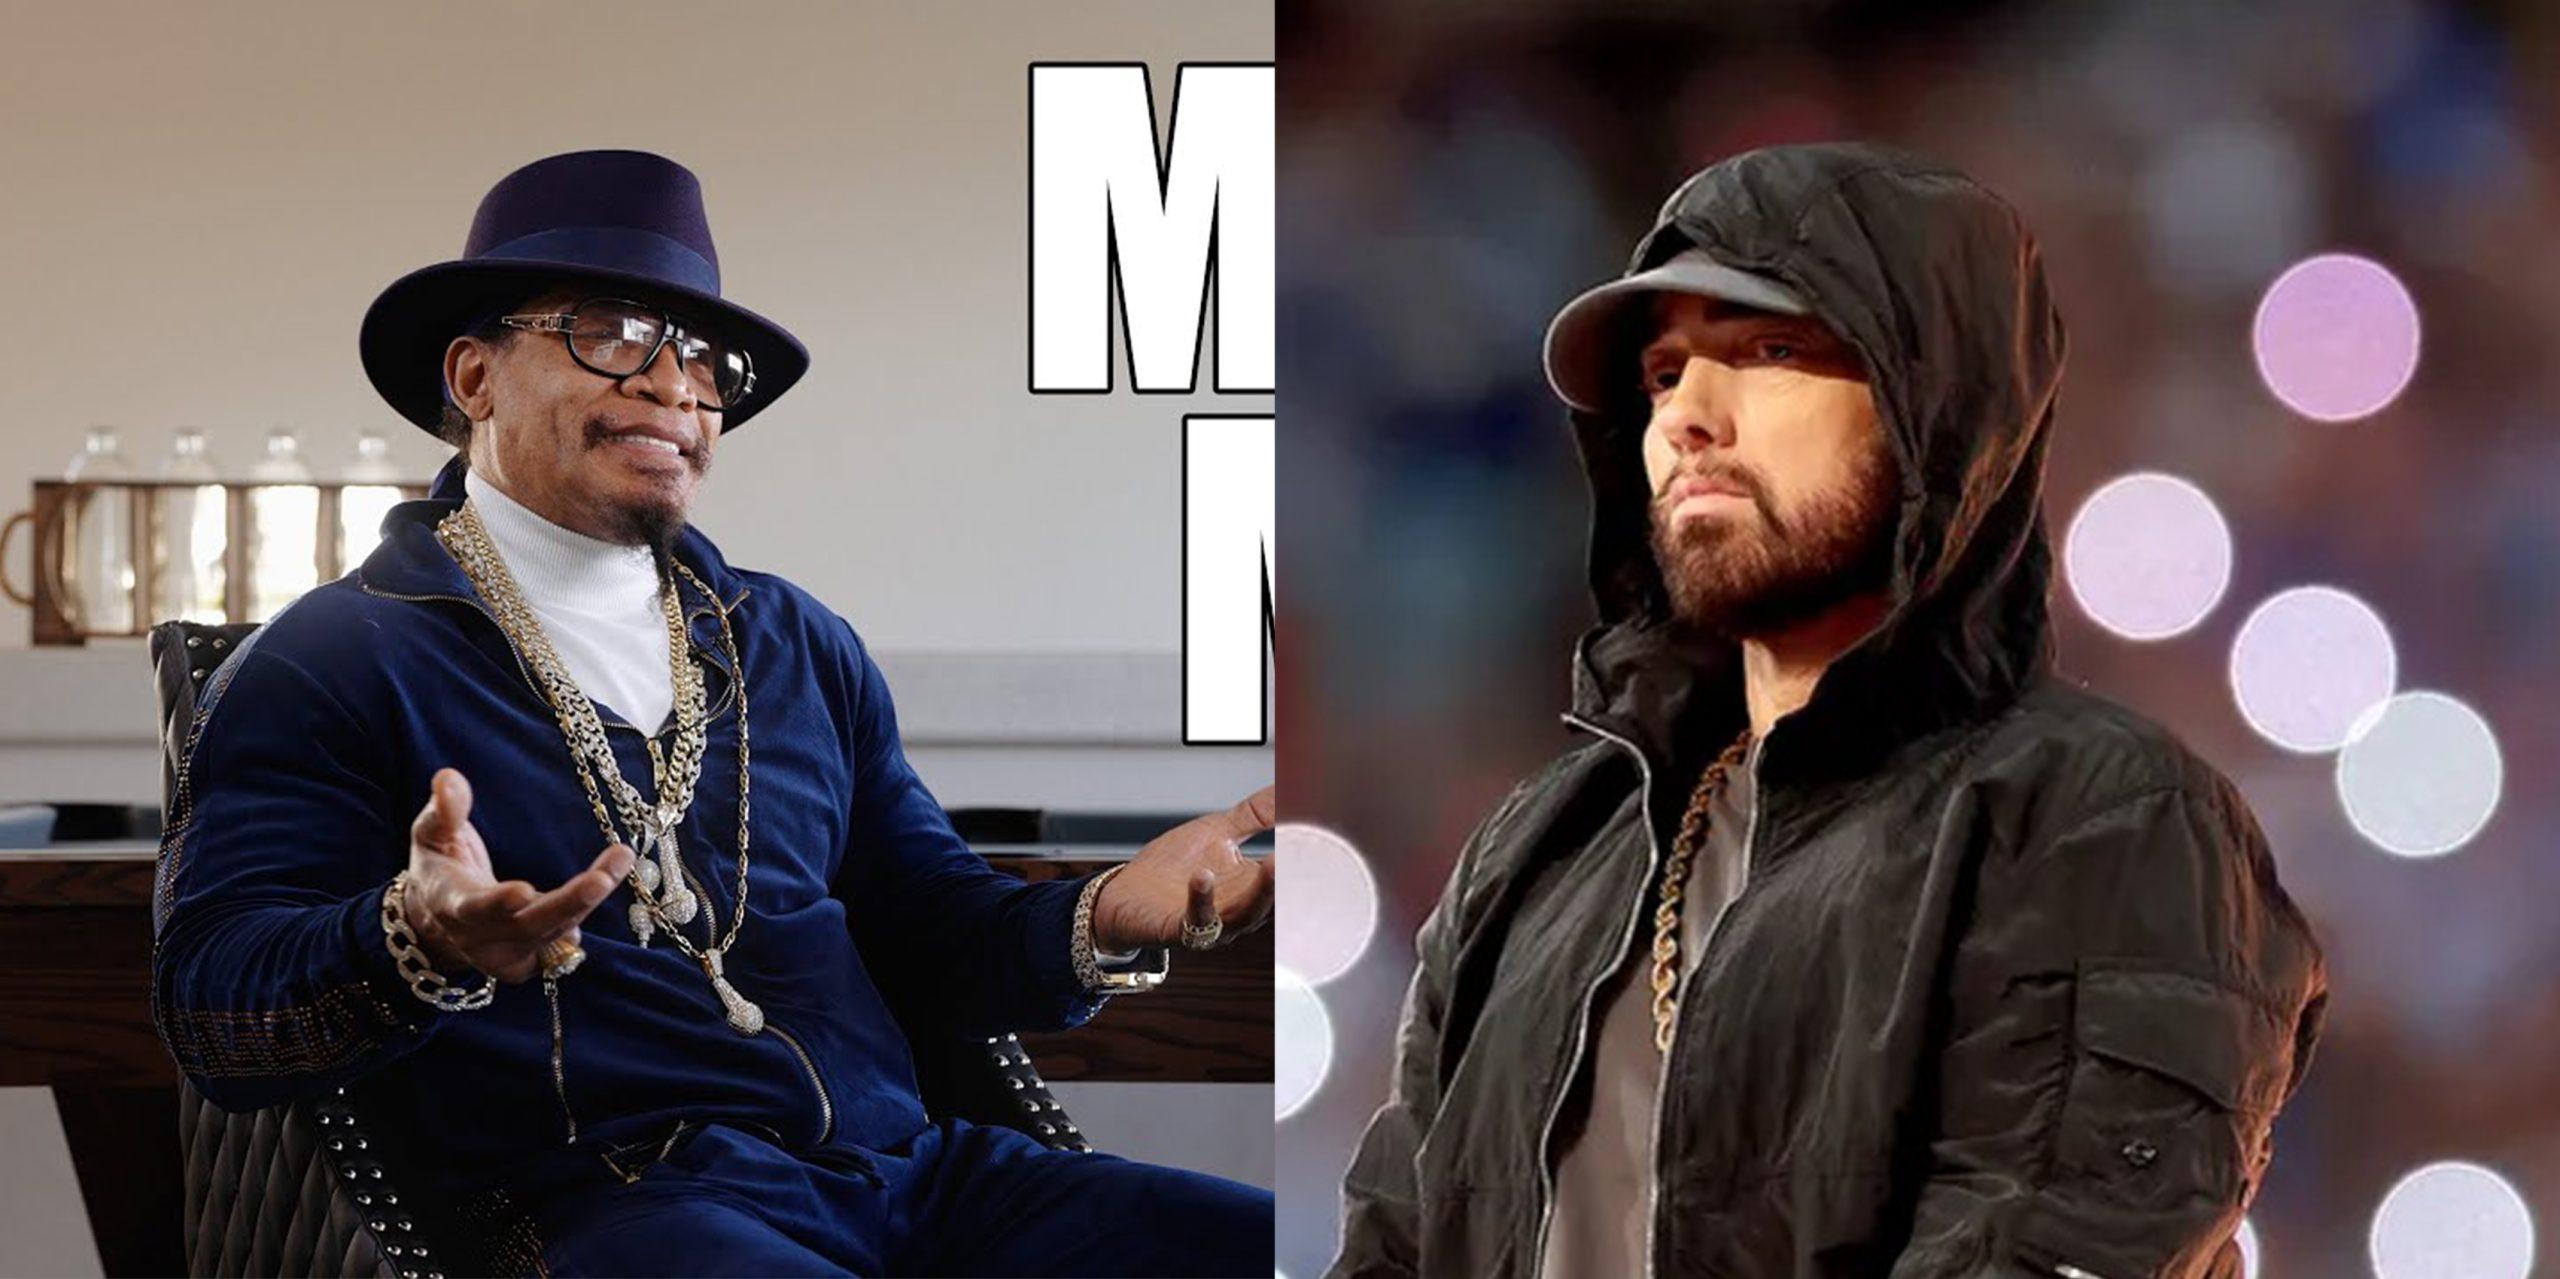 Melle Mel says Eminem gets Top spot because he's white